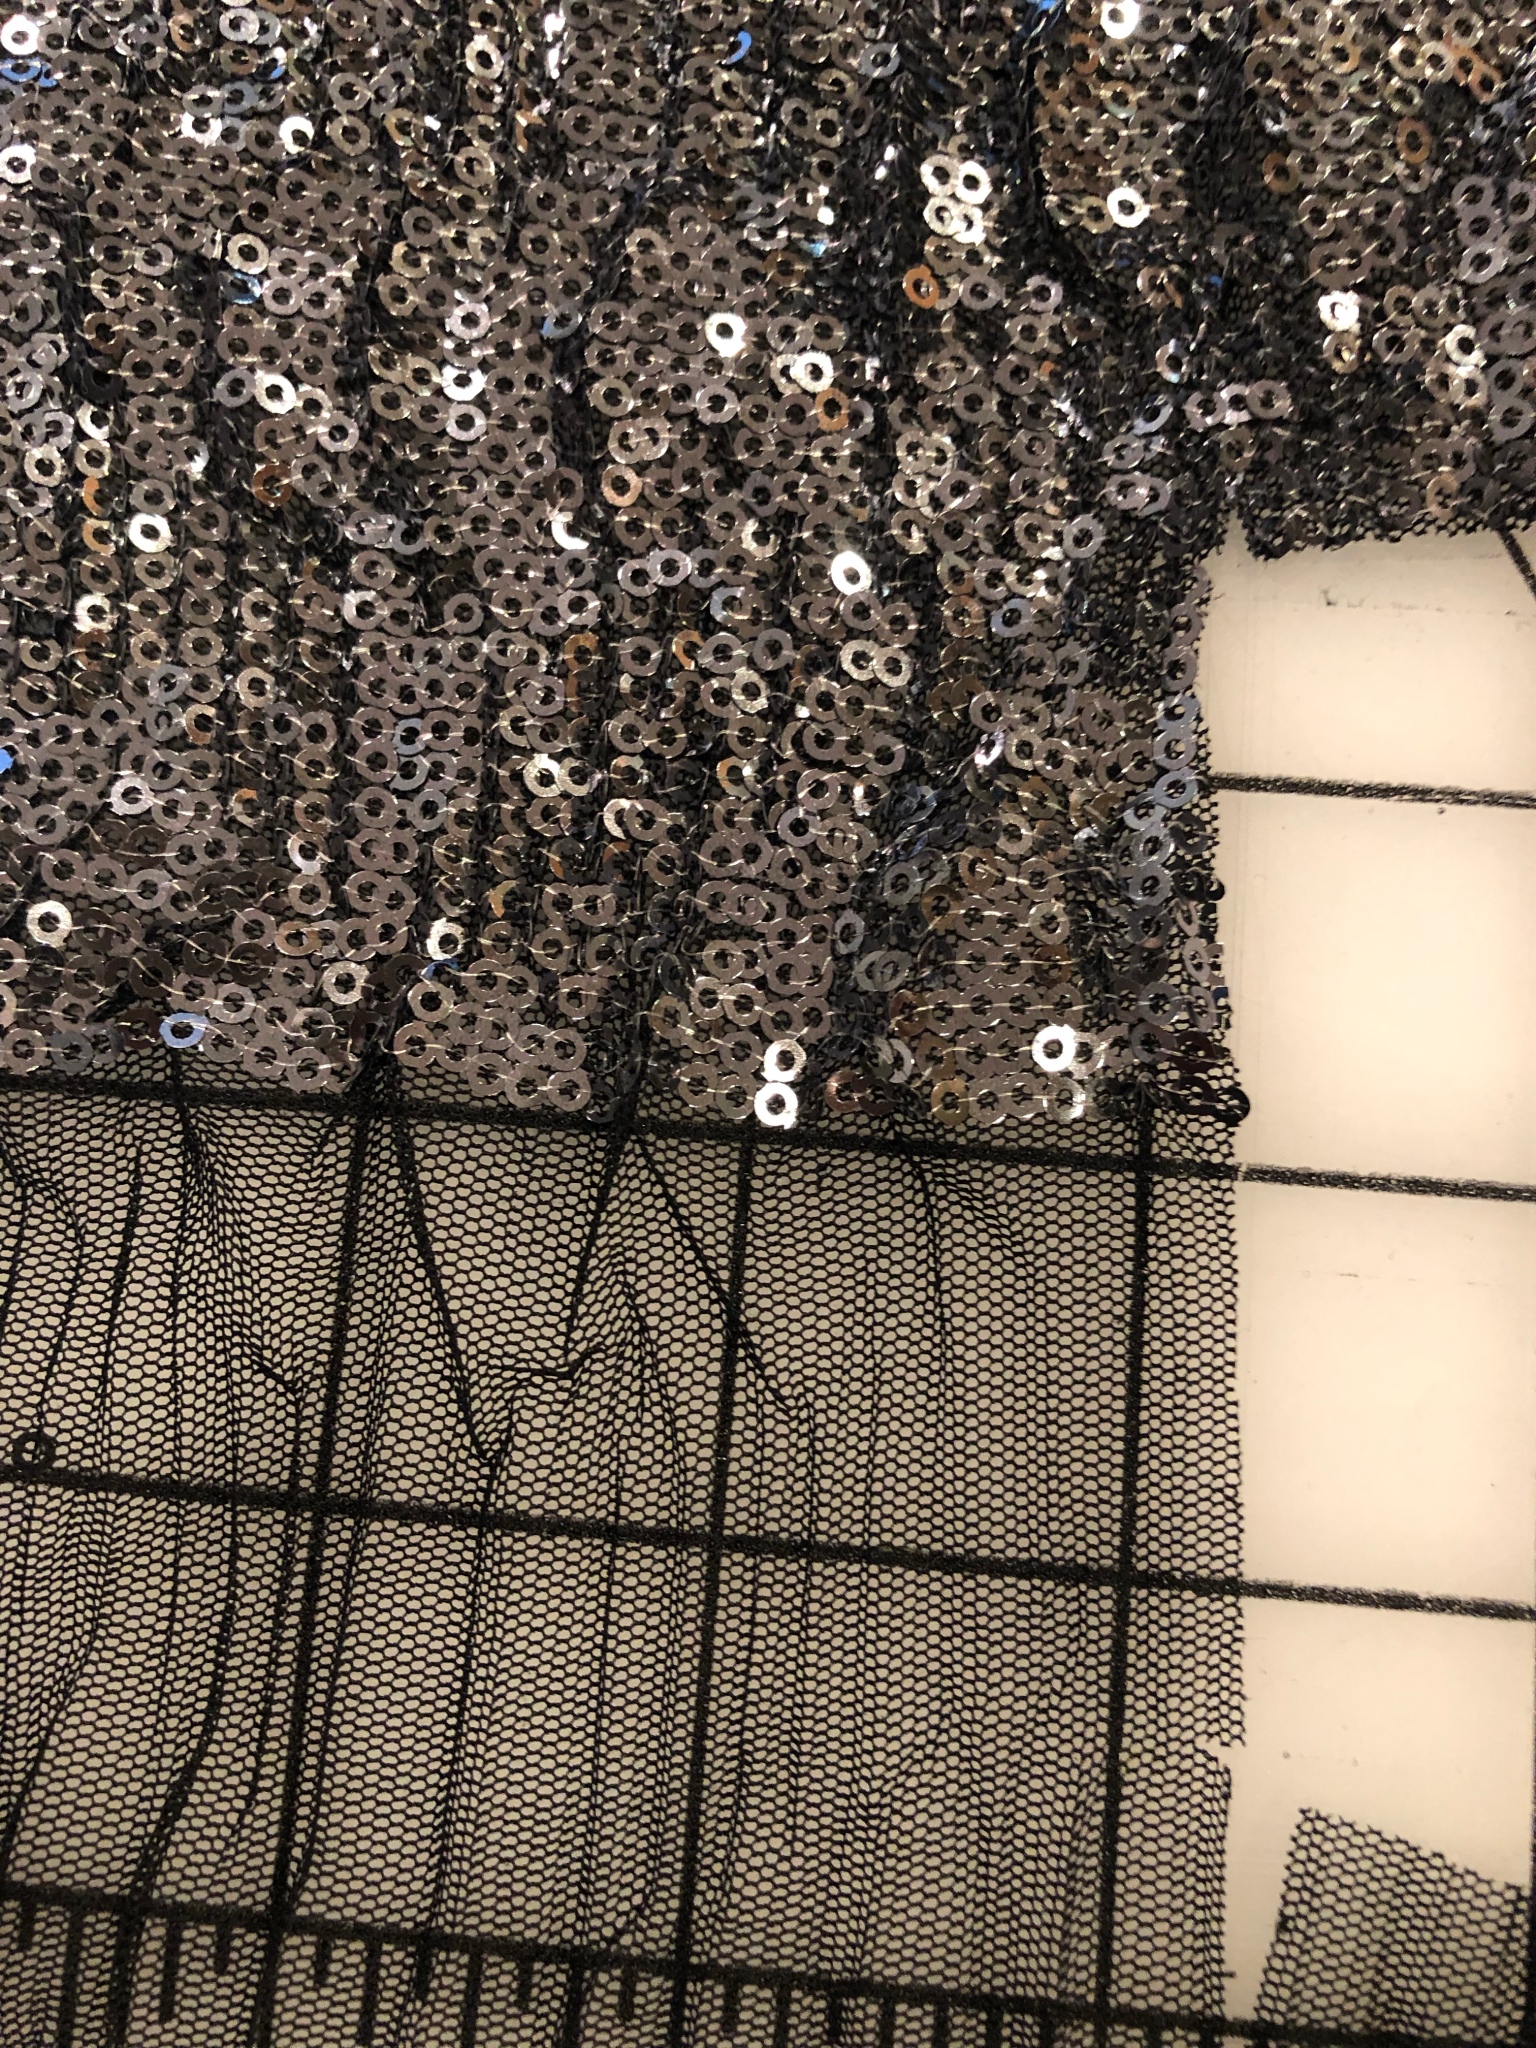 Sequined skirt – Part 2